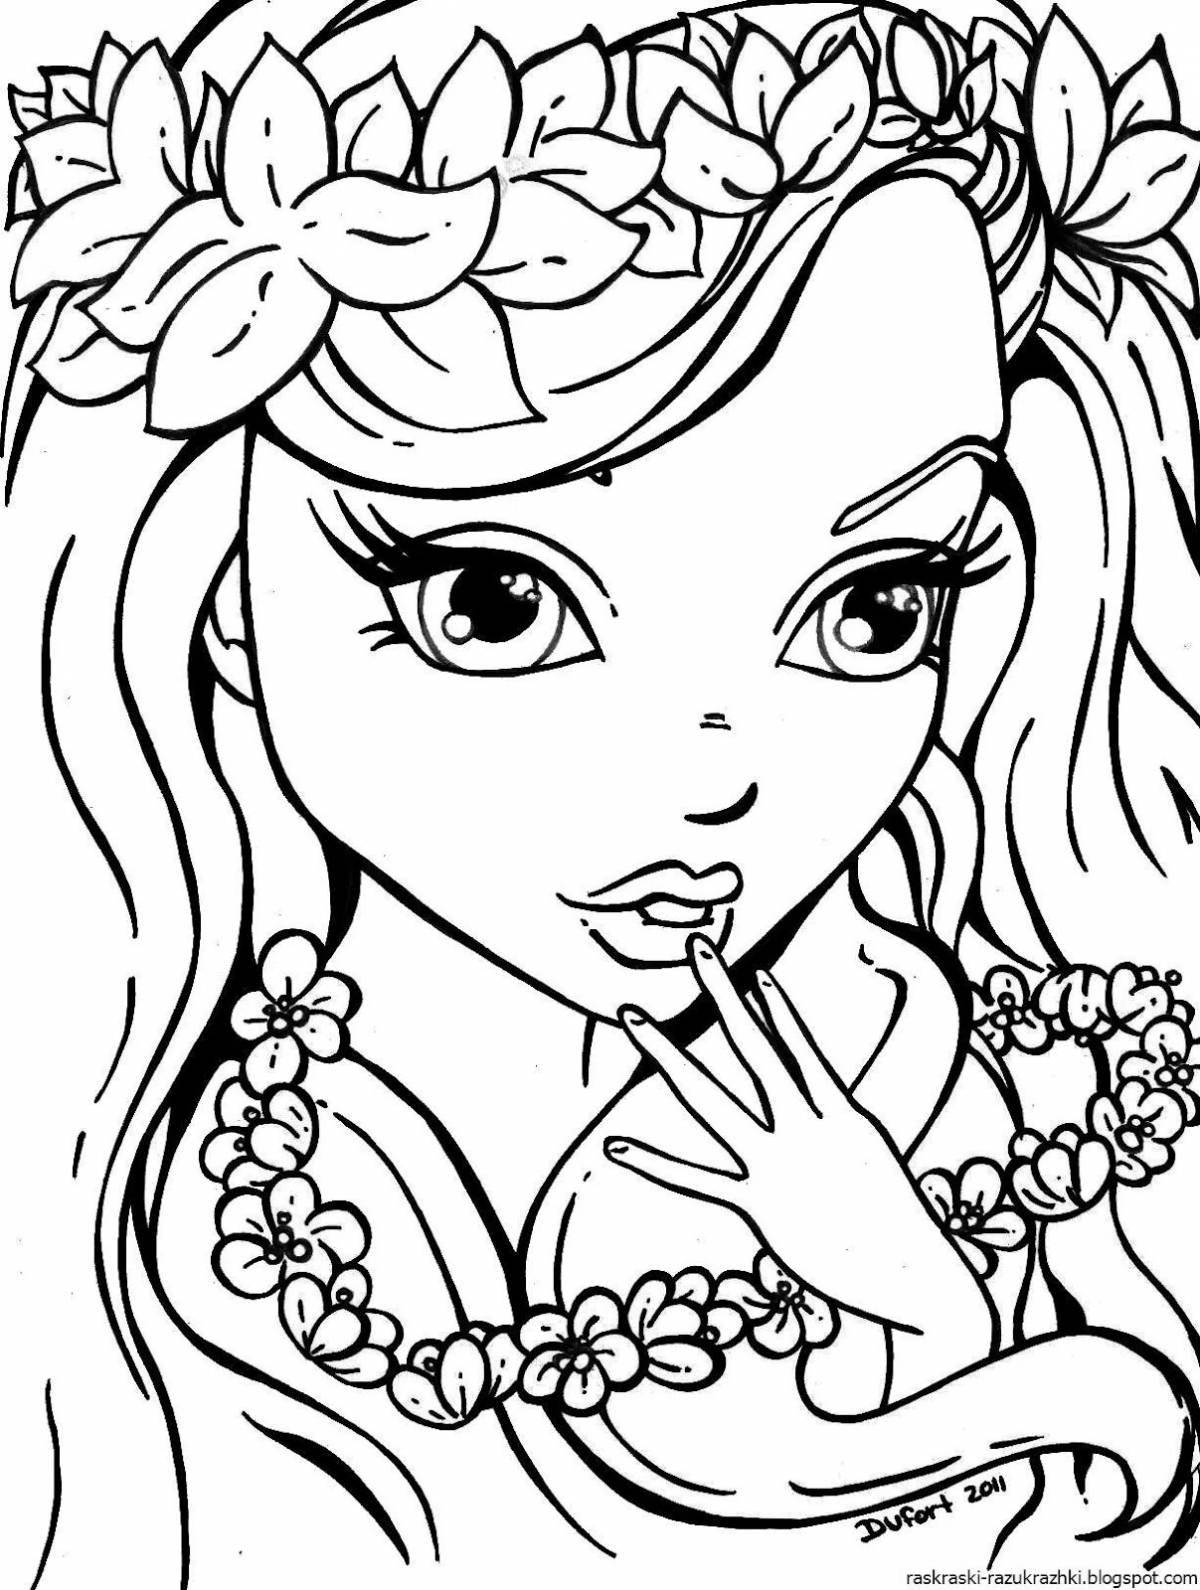 Sparkle coloring book for girls full sheet